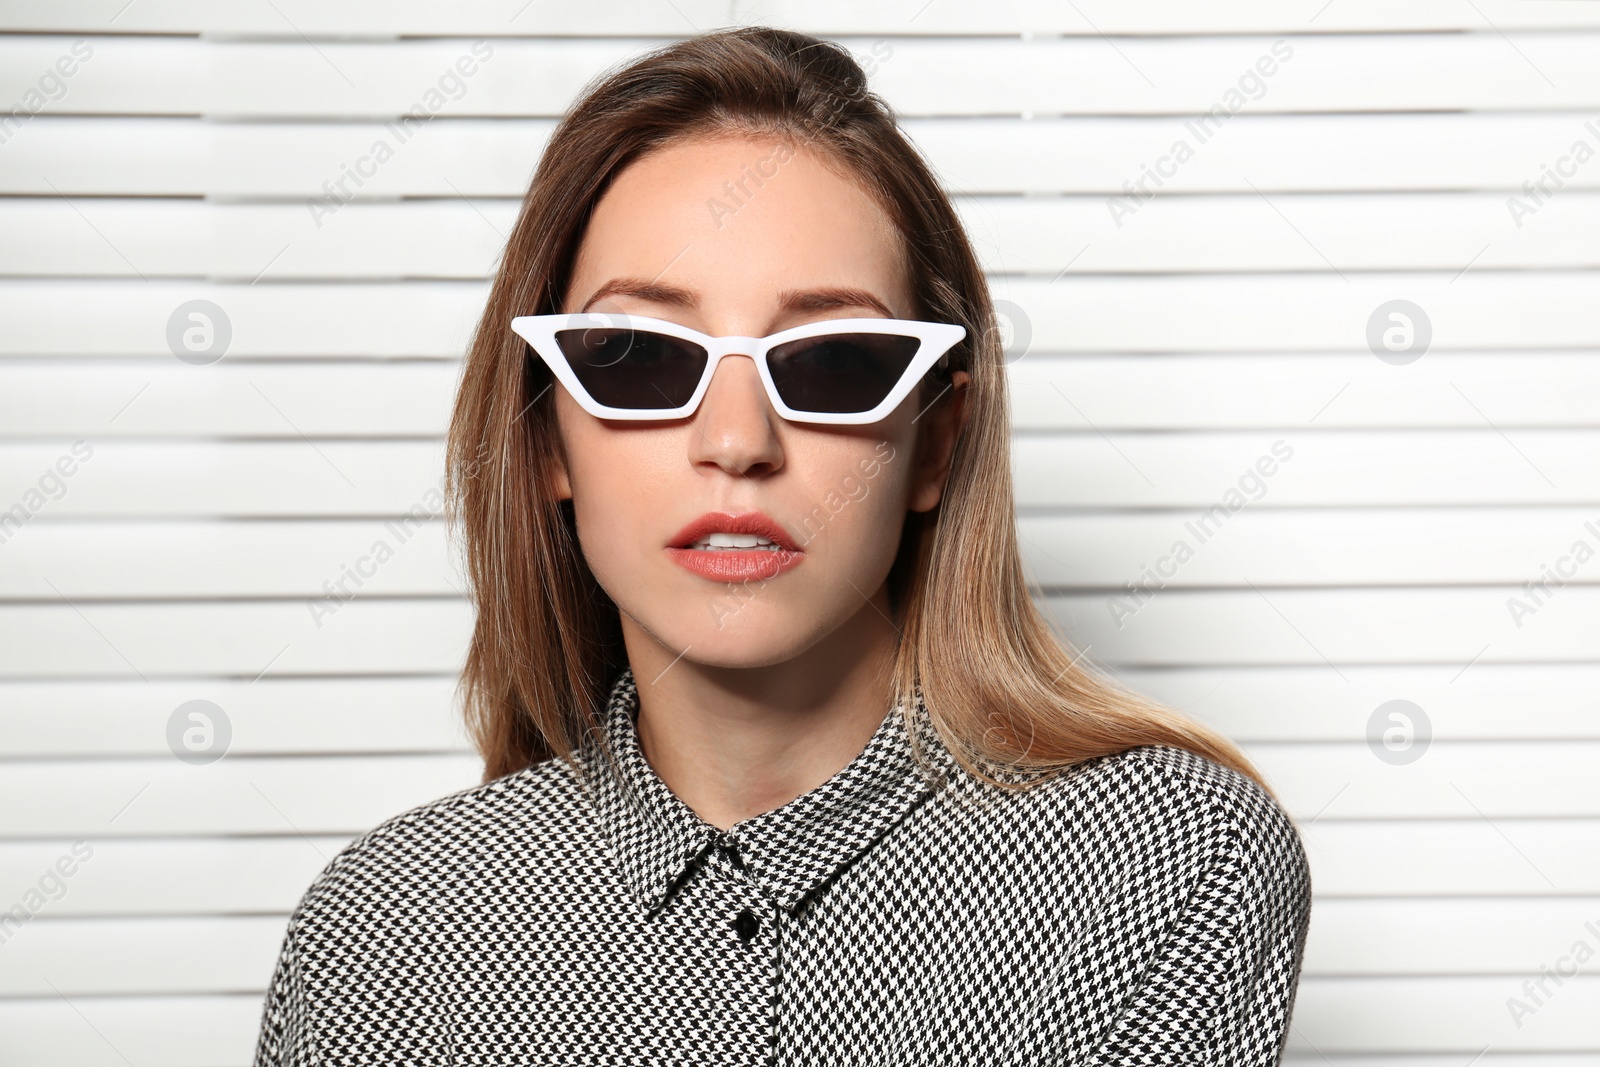 Photo of Young woman wearing stylish sunglasses against blinds